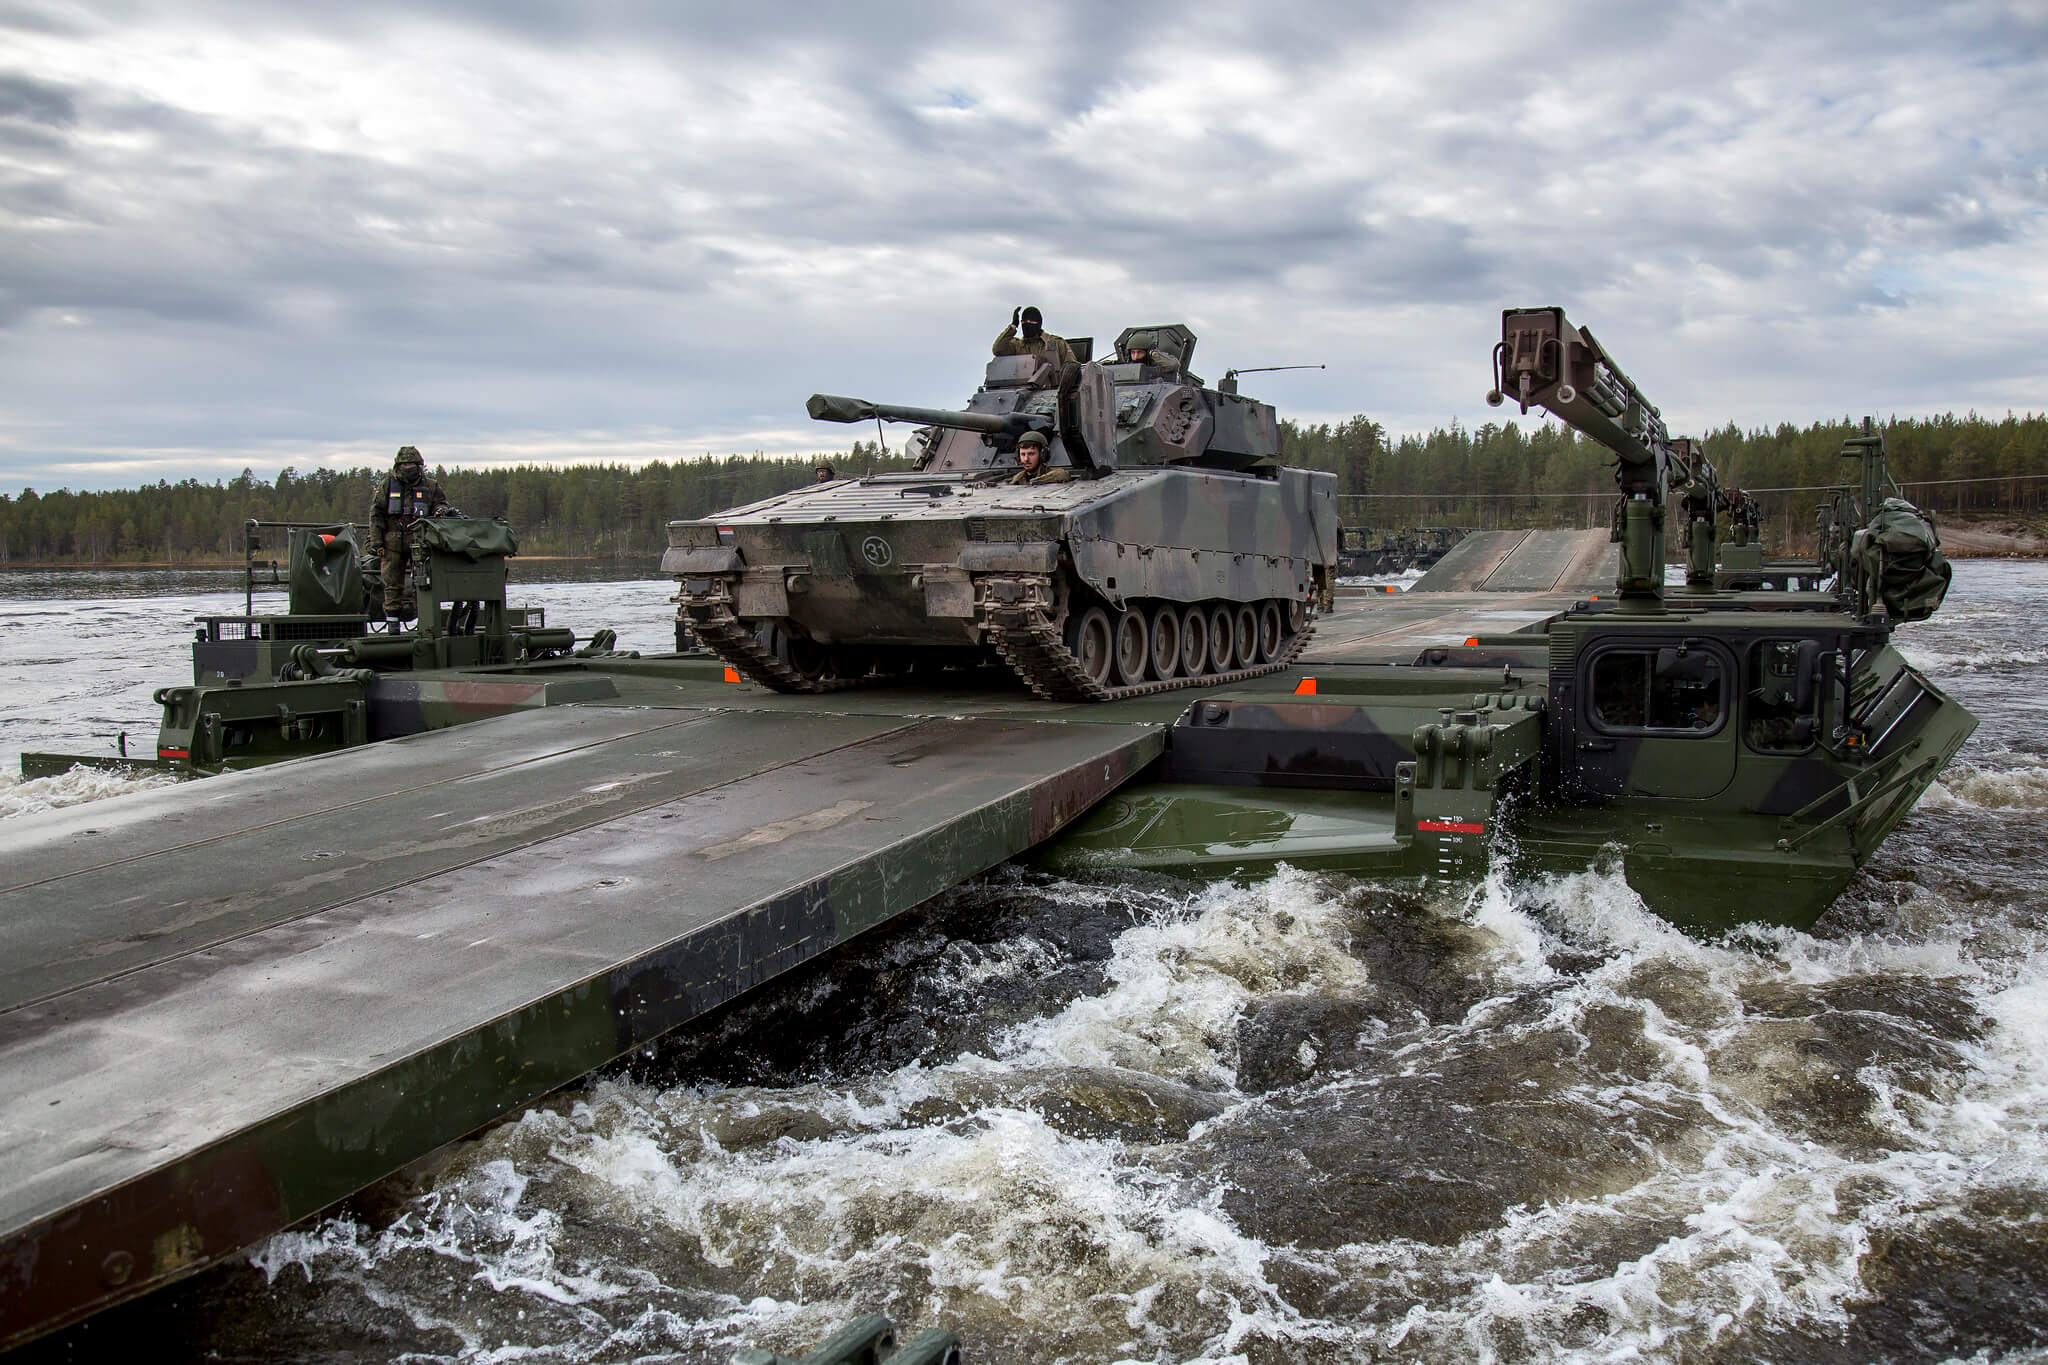 Jurgens - German soldiers cross over Dutch armoured infantry fighting vehicles during NATO's exercise Trident Juncture in 2018. NATO